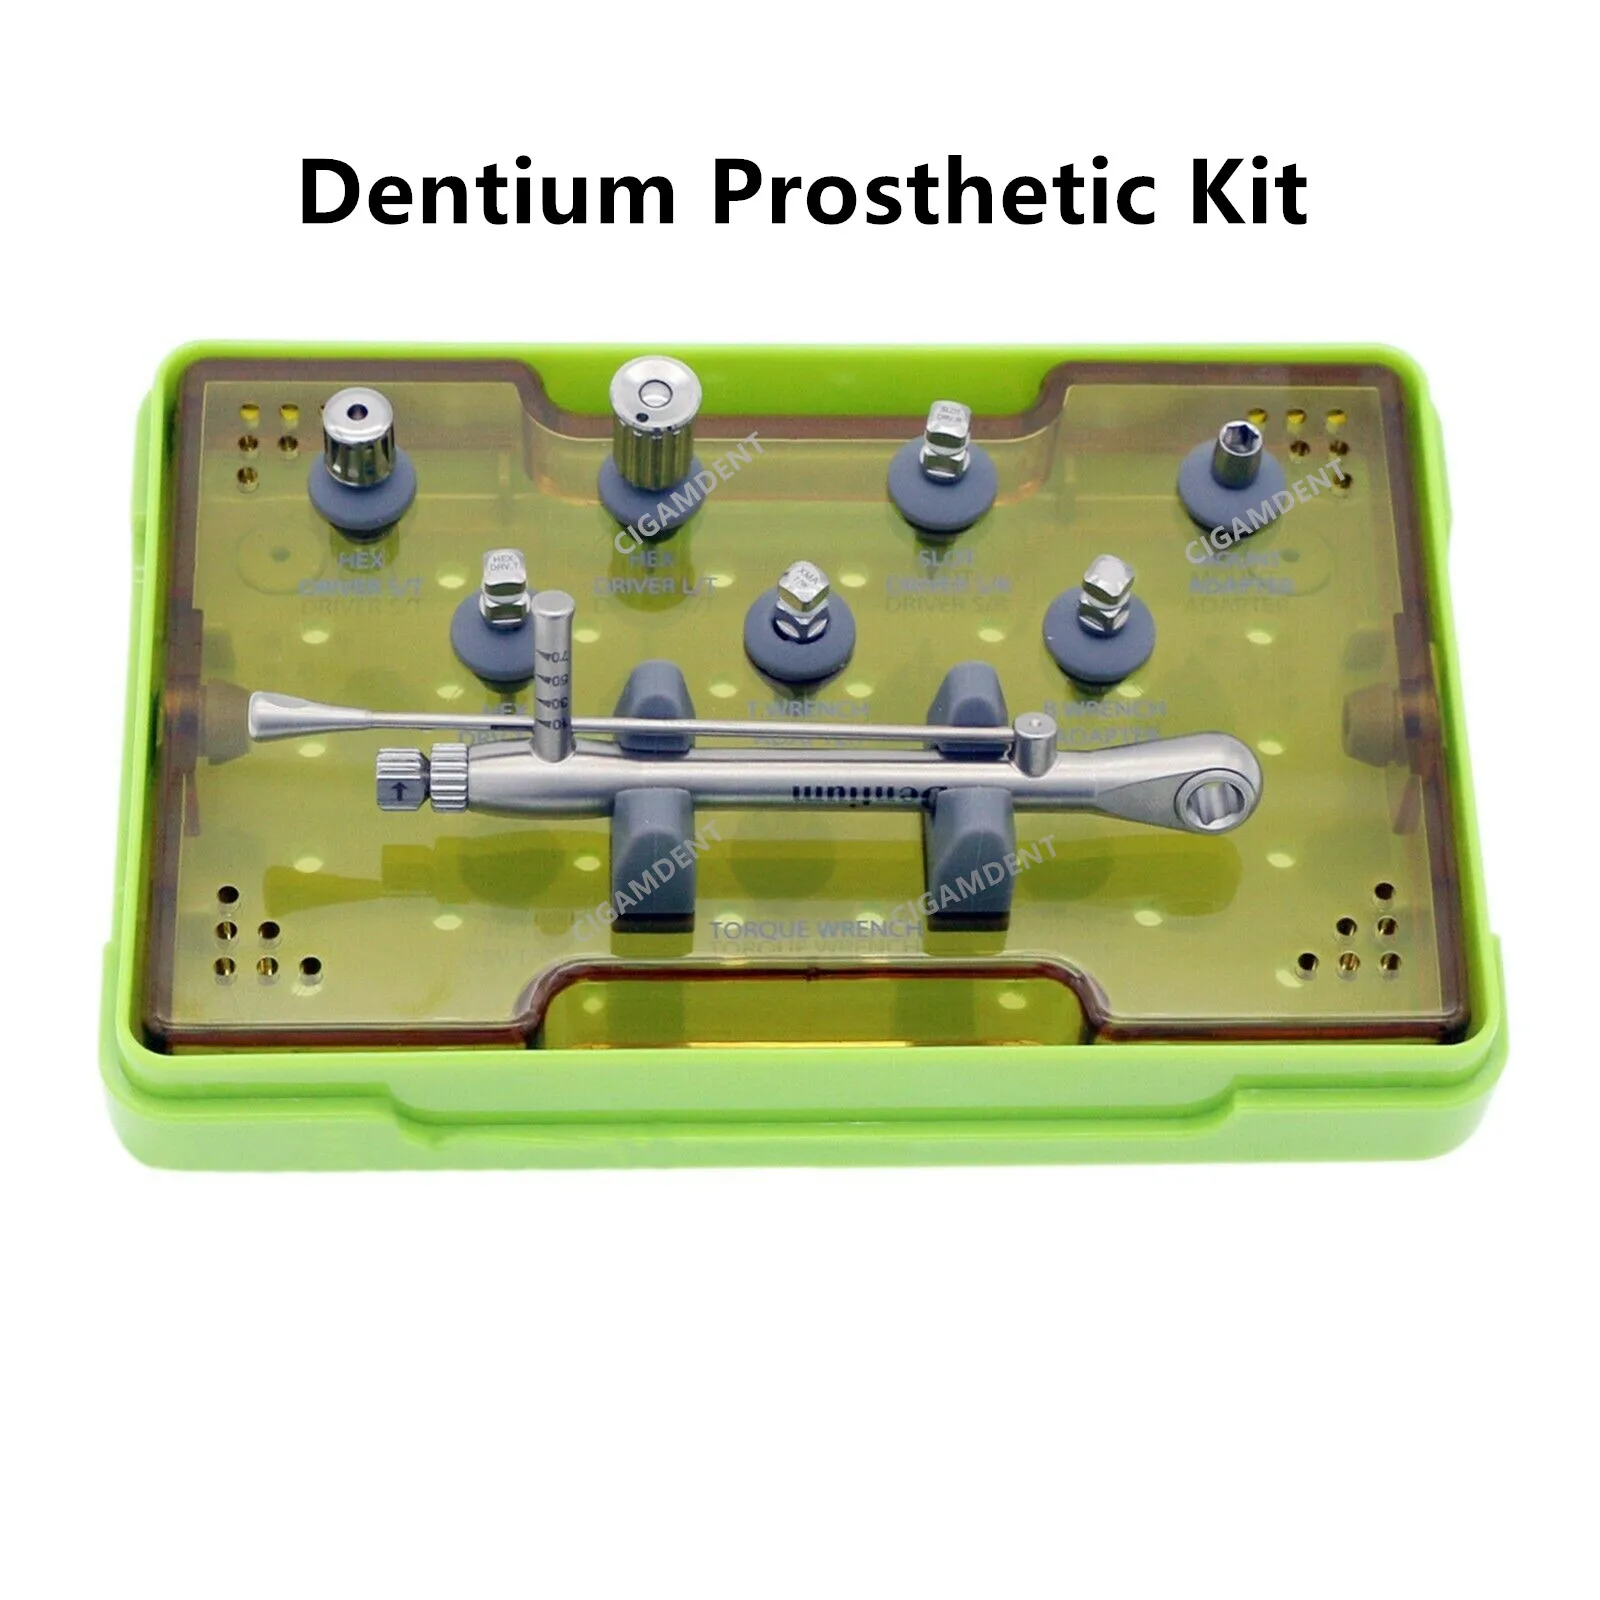 Dentium Prosthetic Kit Dental Implant Torque Wrench 10-70NCM 7 Screwdrivers Screw Hand Hex Drivers With Box Holder